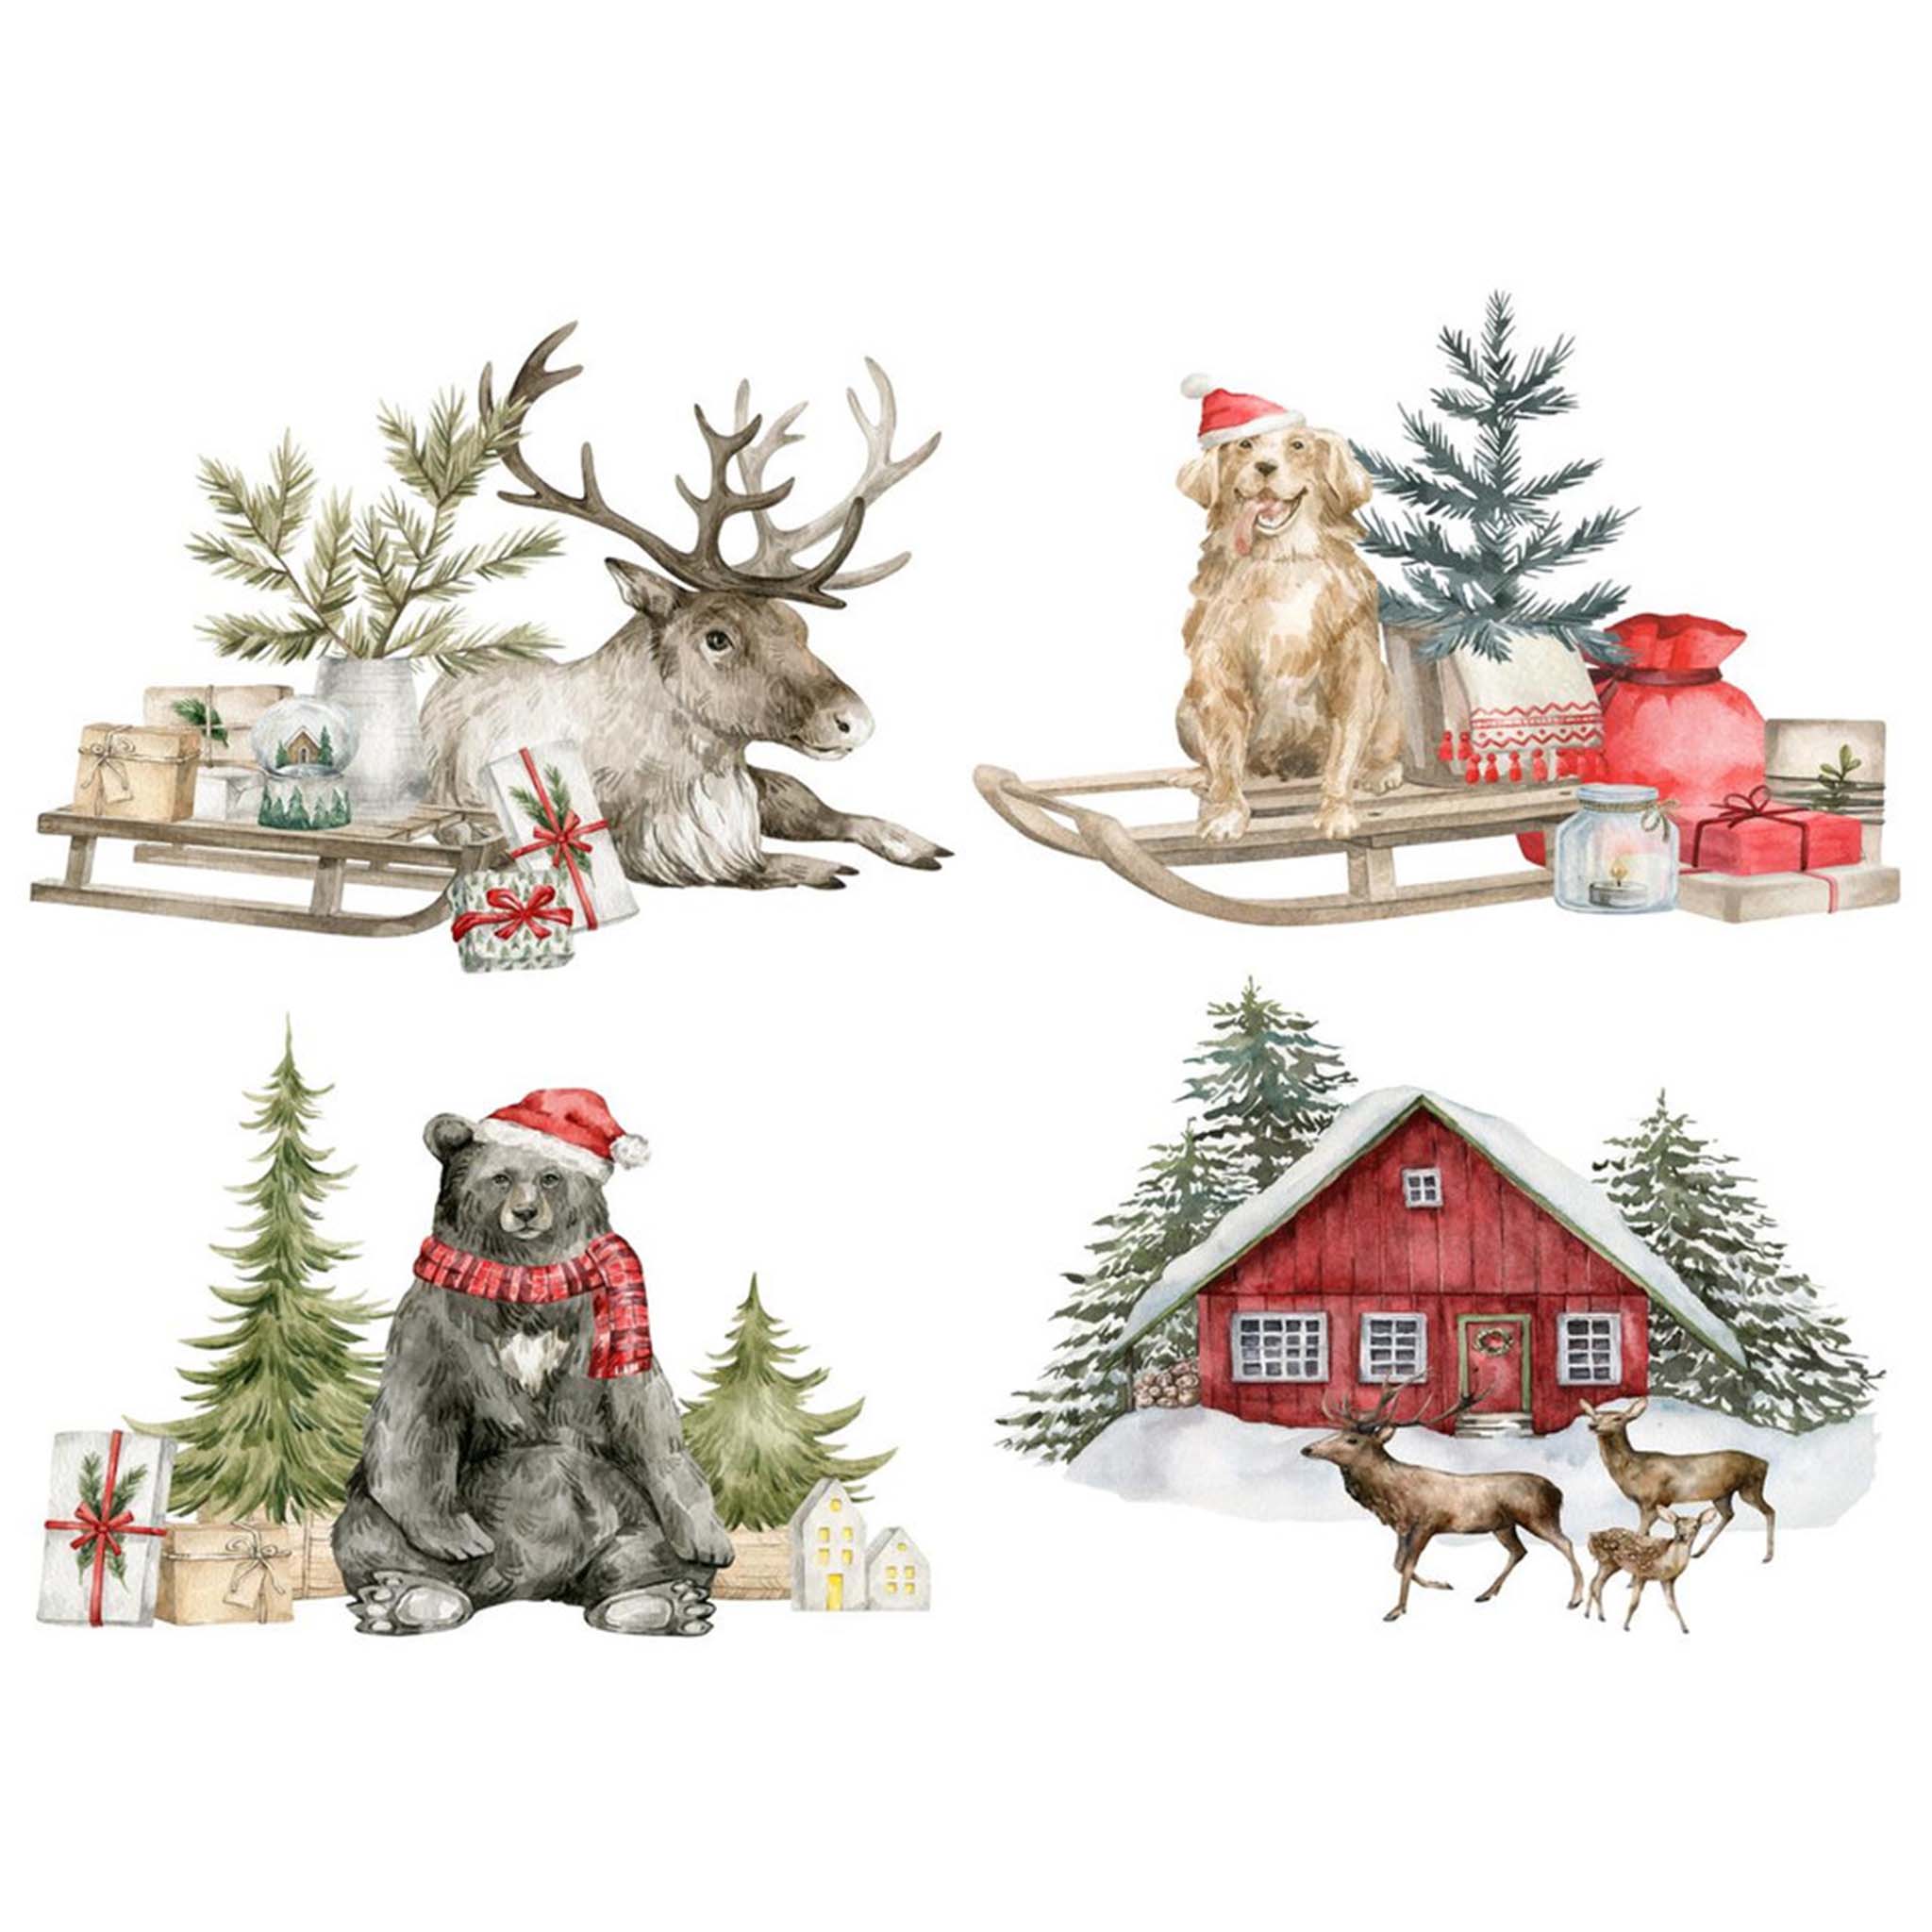 A4 rice paper designs against a white background that feature four illustrations of animals in Christmas scenes - a bear, dog, group of deer, and reindeer.